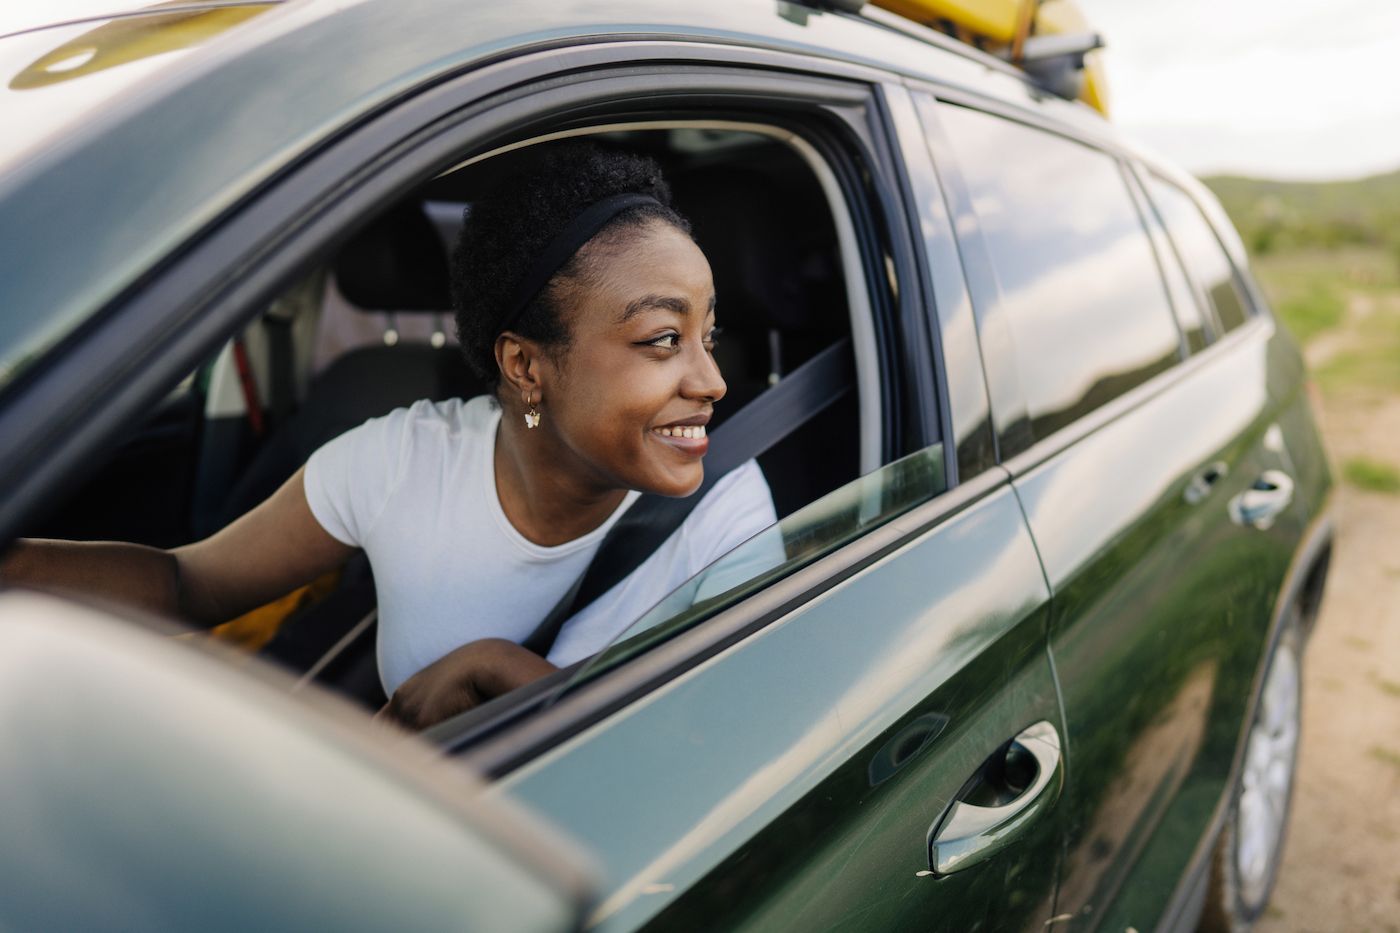 What Auto Loan Rate Can You Qualify for Based on Your Credit Score